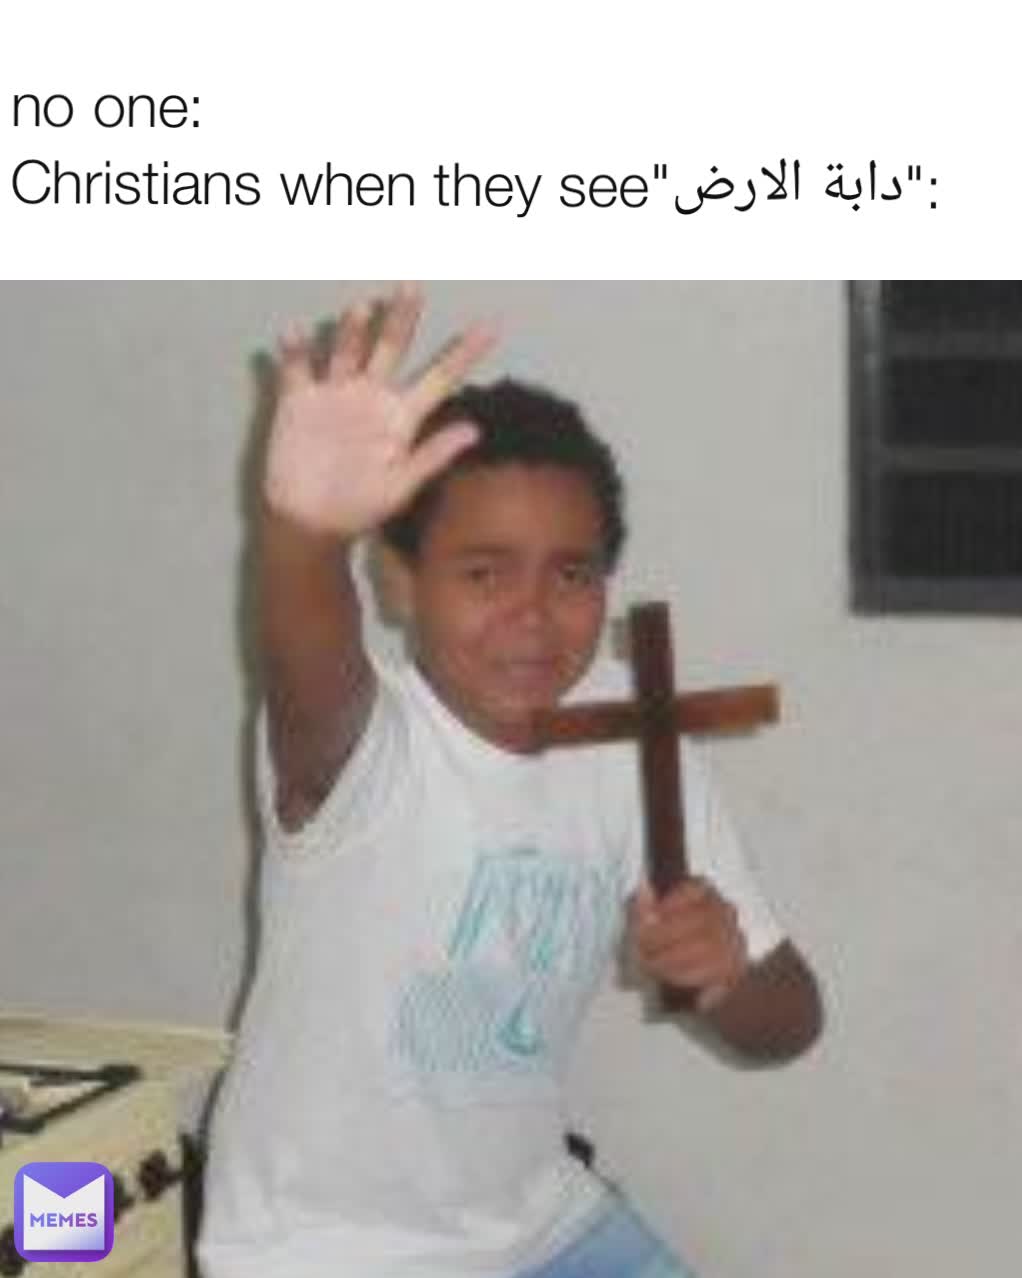 no one:
Christians when they see"دابة الارض":